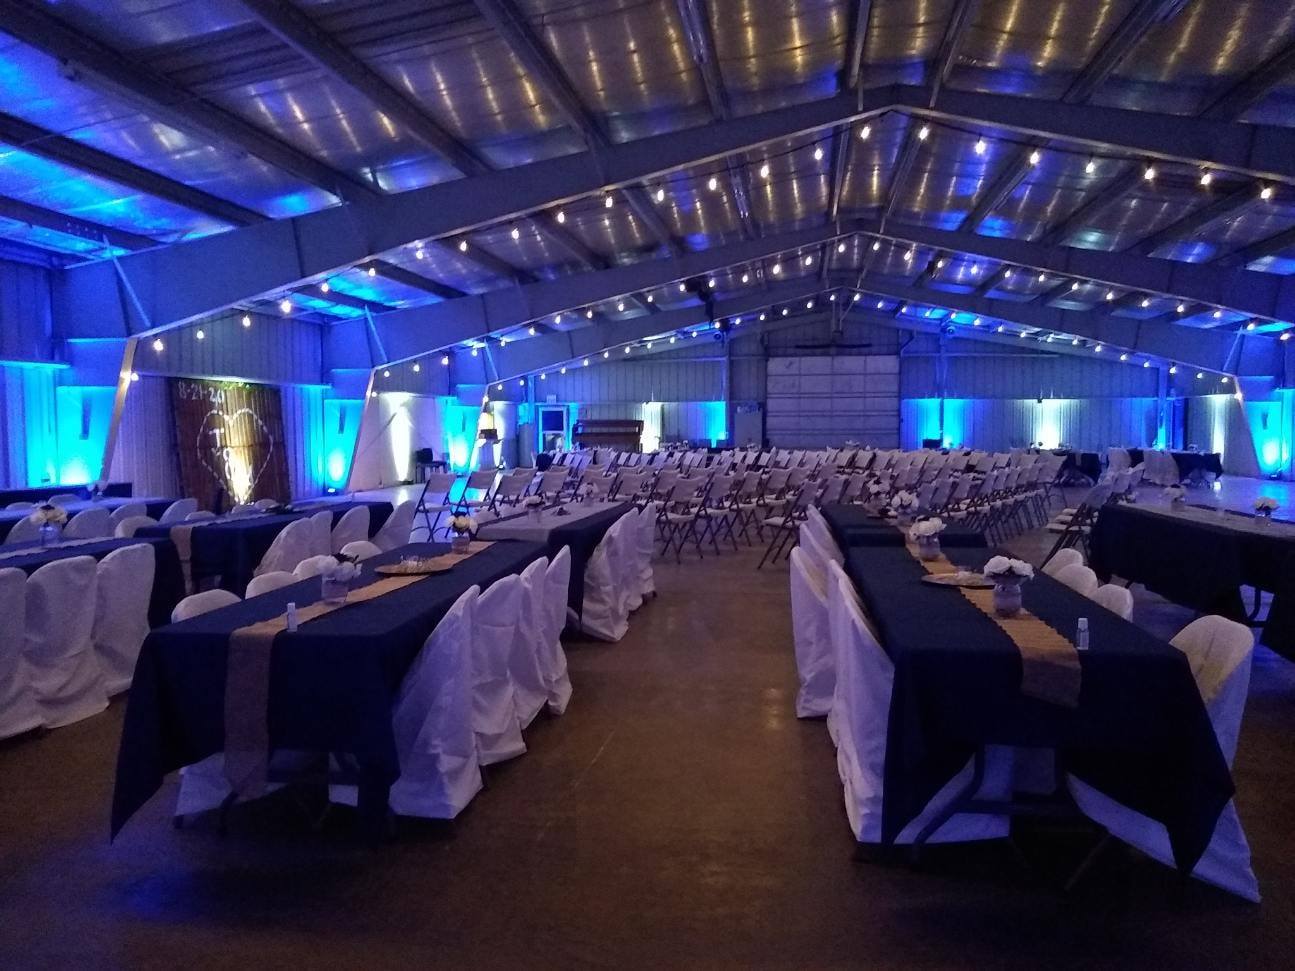 Lake County Fairgrounds wedding lighting in blue and white with bistro on the beams by Duluth Event Lighting.